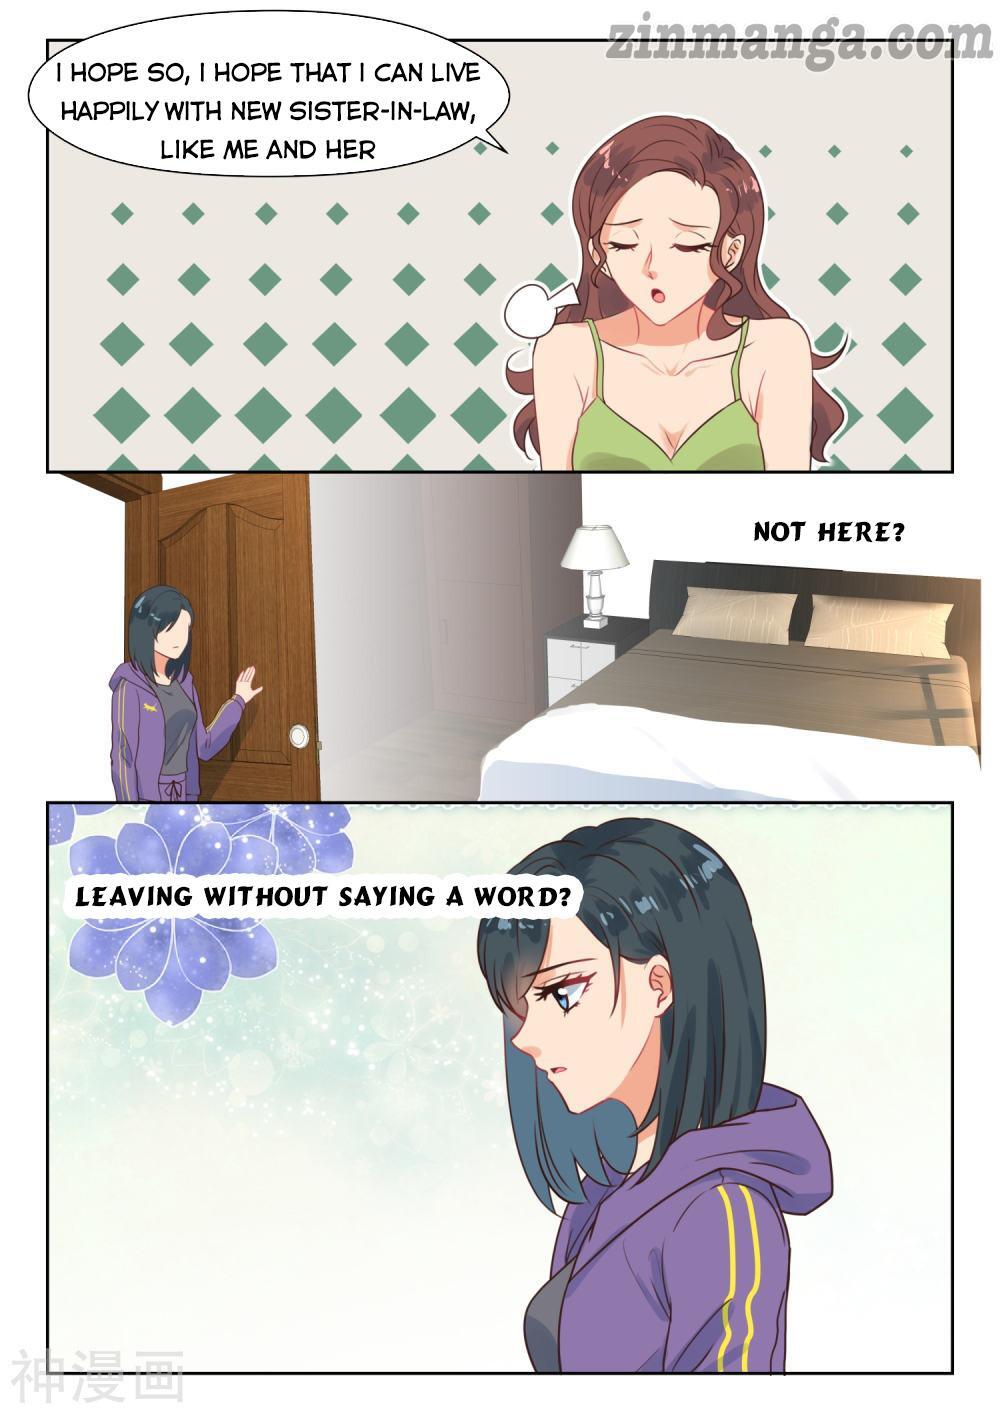 My Adorable Girlfriend - Page 2